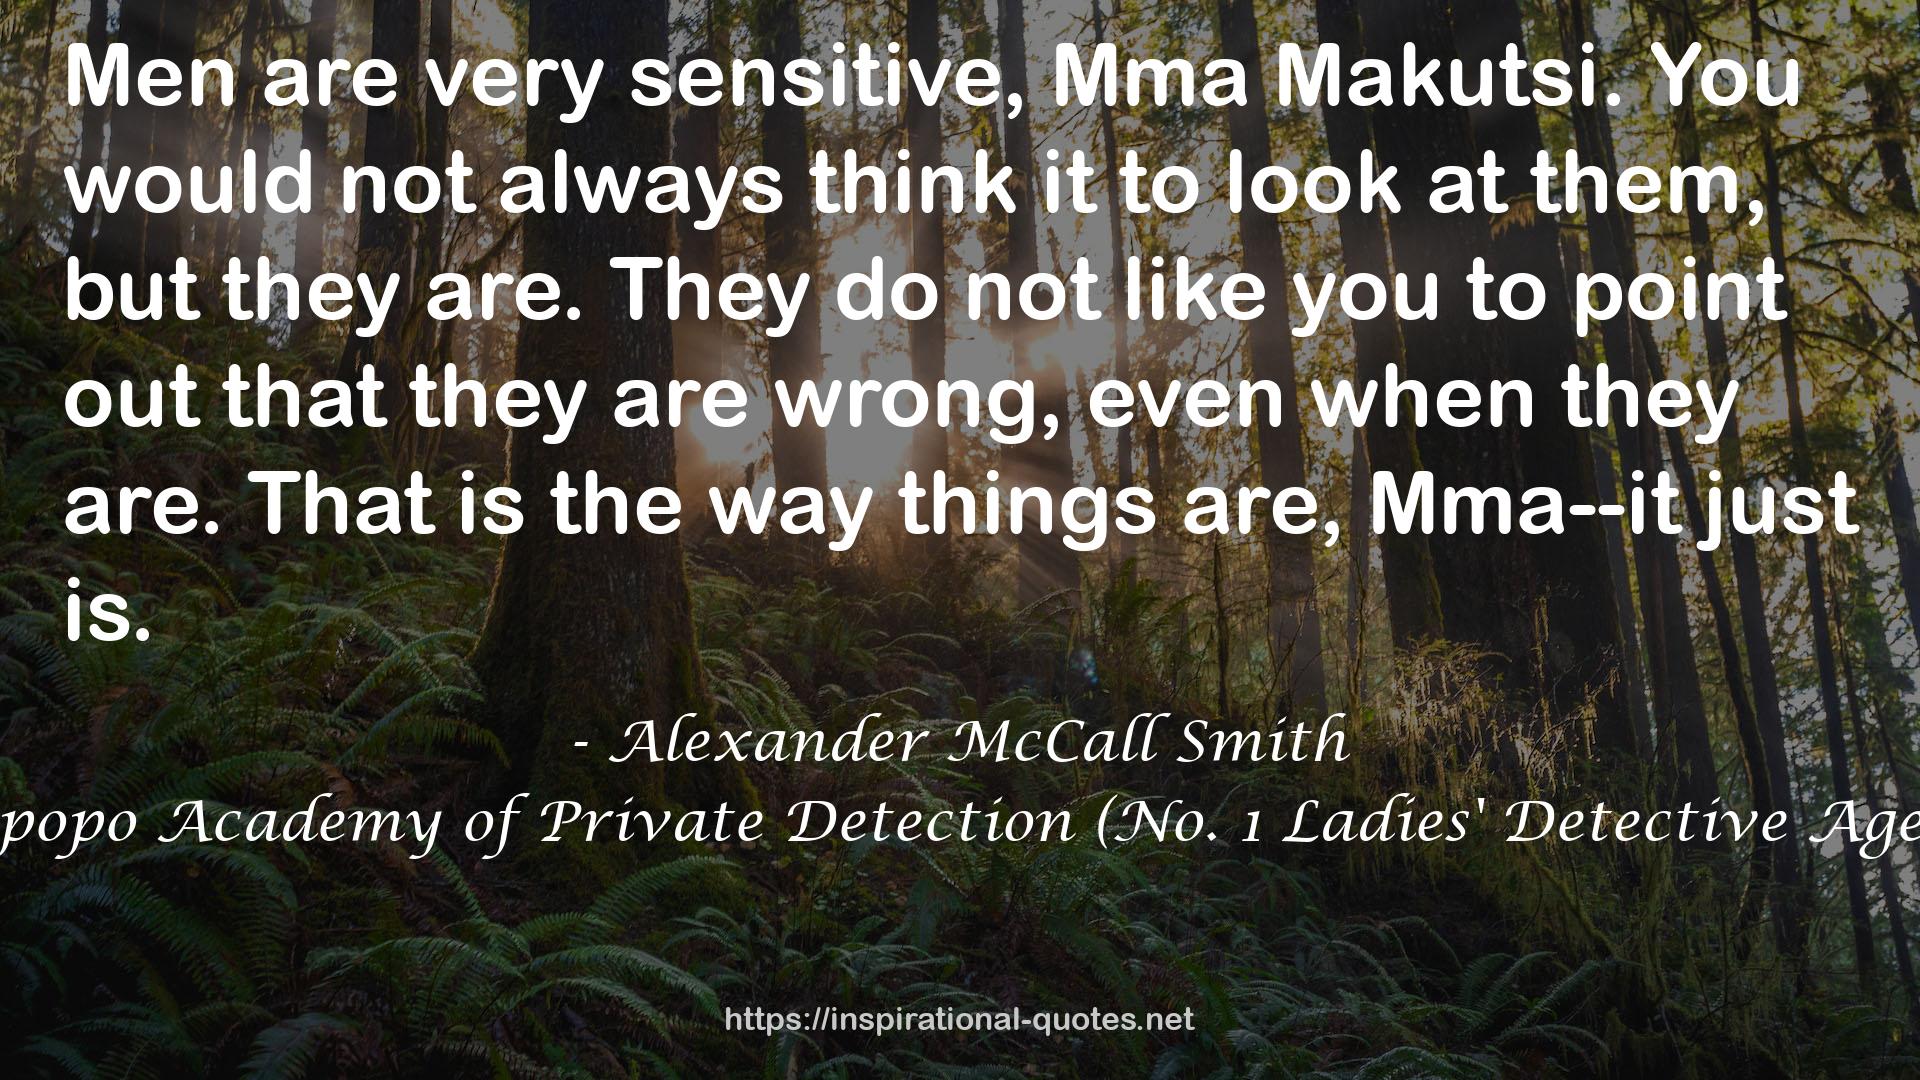 The Limpopo Academy of Private Detection (No. 1 Ladies' Detective Agency #13) QUOTES